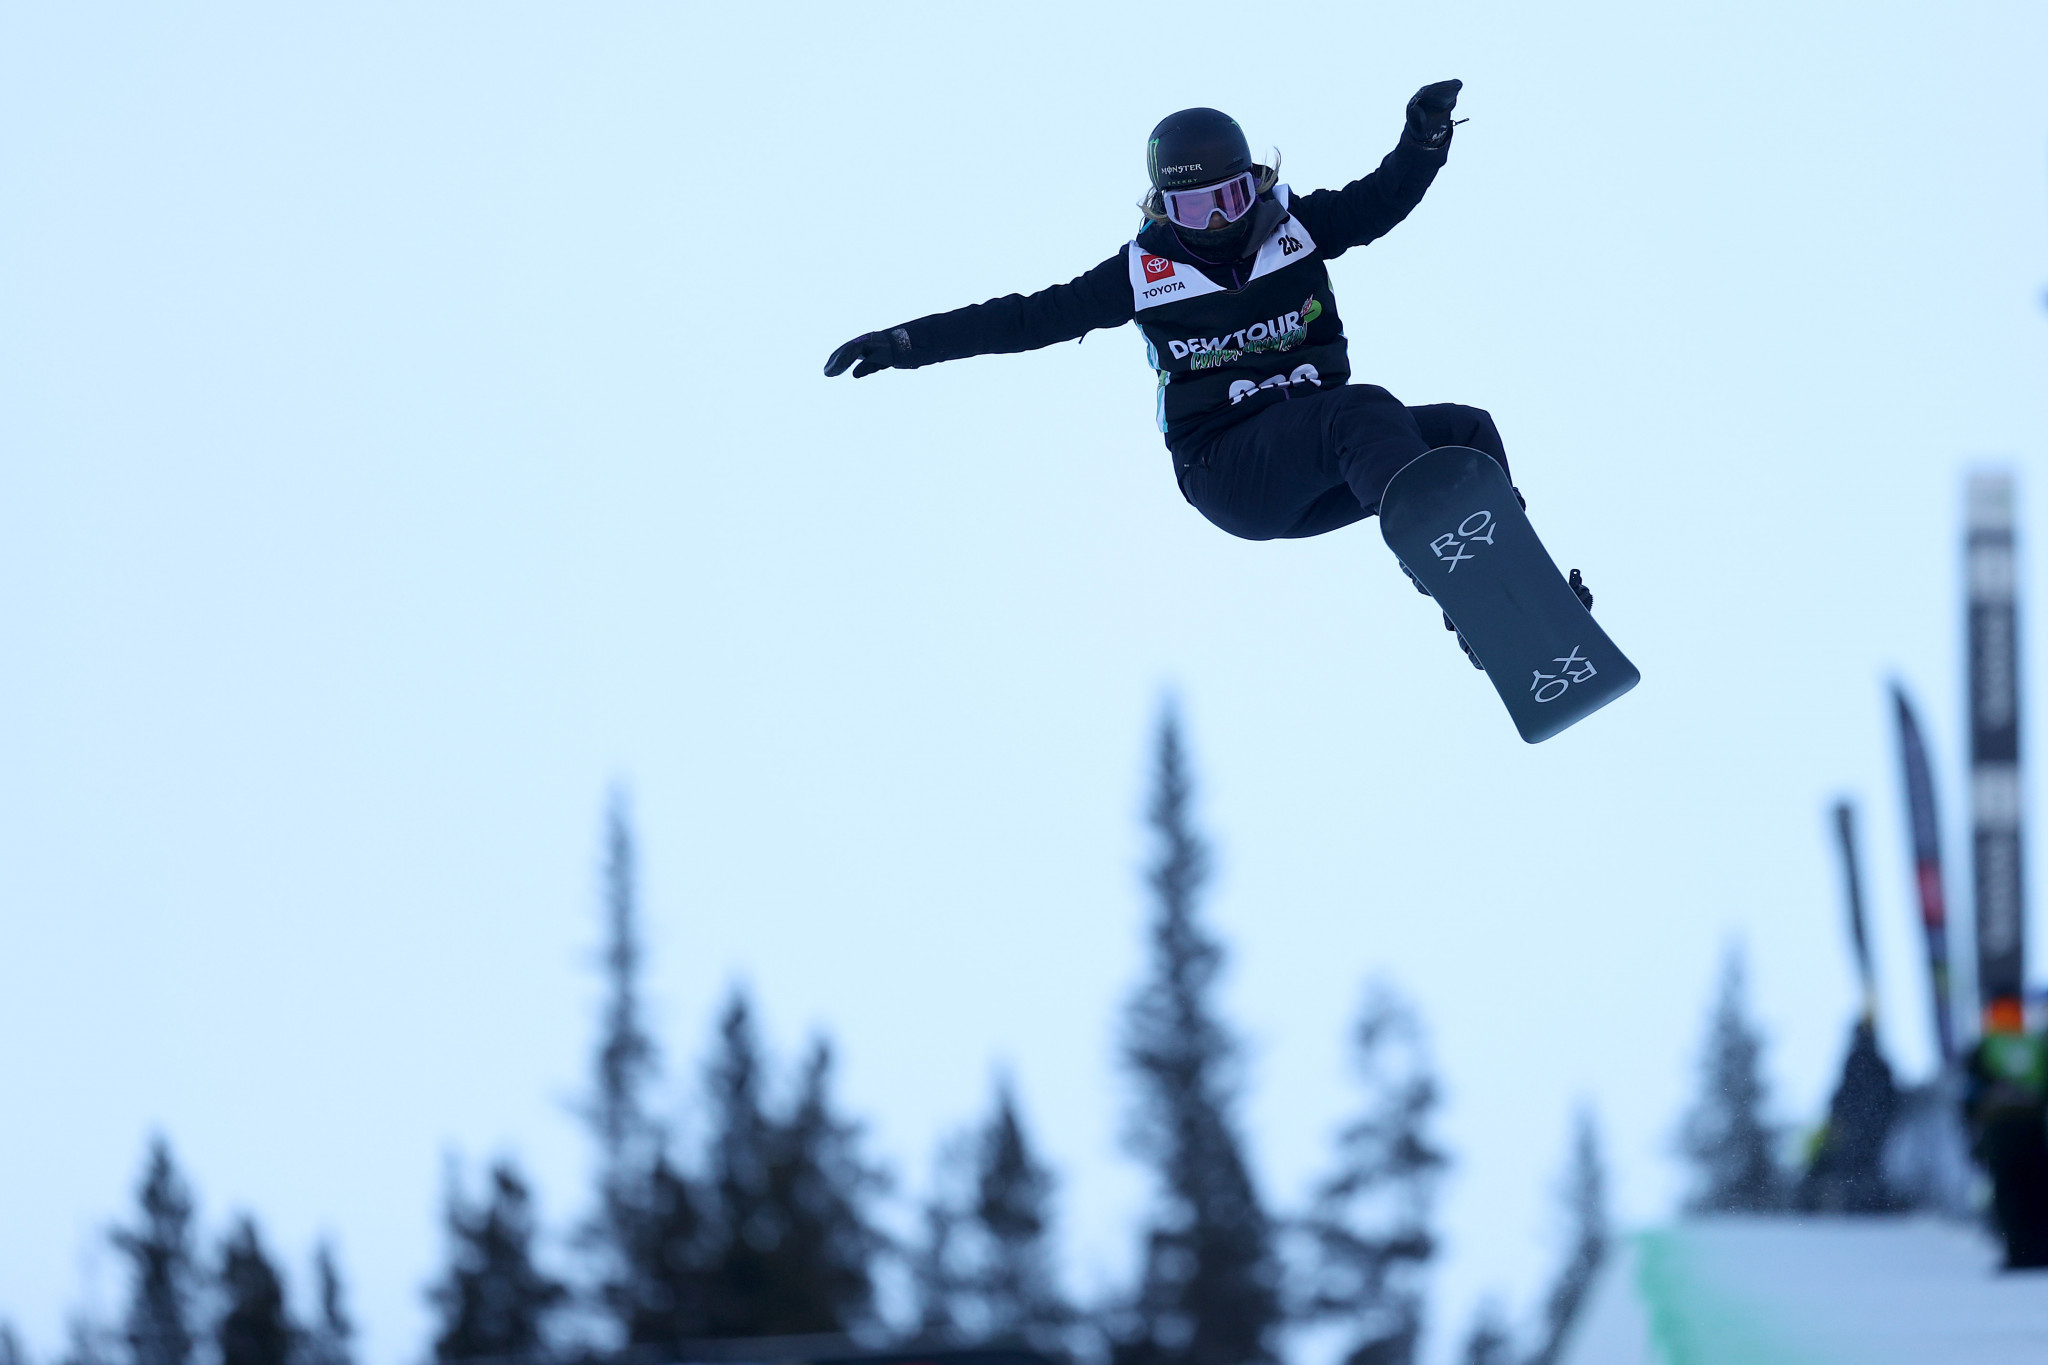 Olympic champions Kim and White set for Snowboard World Cup in Laax